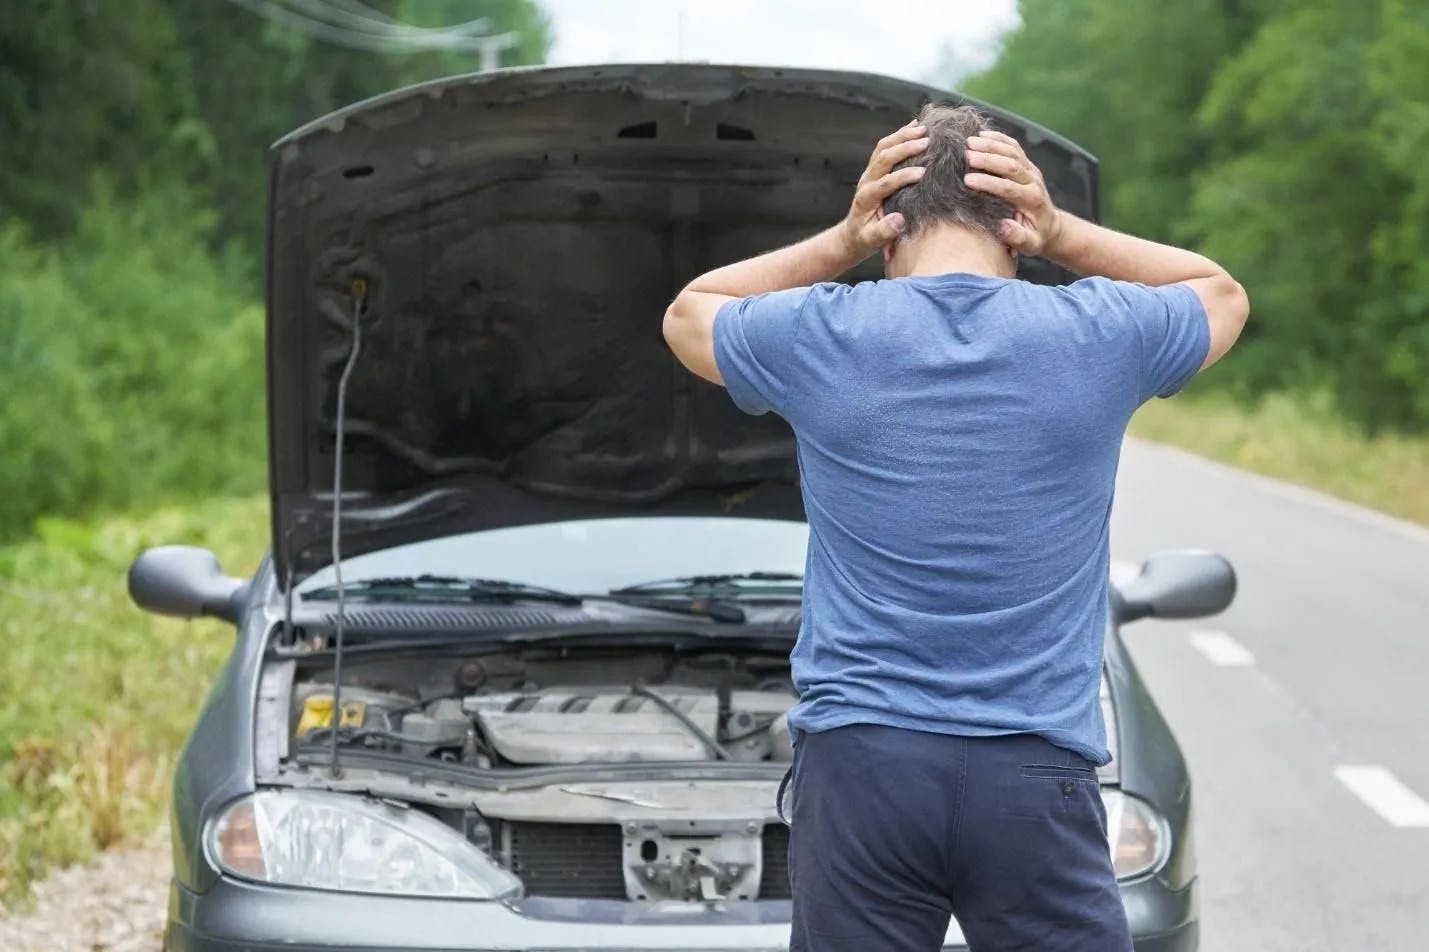 We understand how frustrating it can be when your car breaks down. That's why we're here to make sure you can get back on the road in no time without any hassles. Our certified mechanics come with all the necessary tools and equipment required for repair and maintenance work -  saving you time, money and effort.